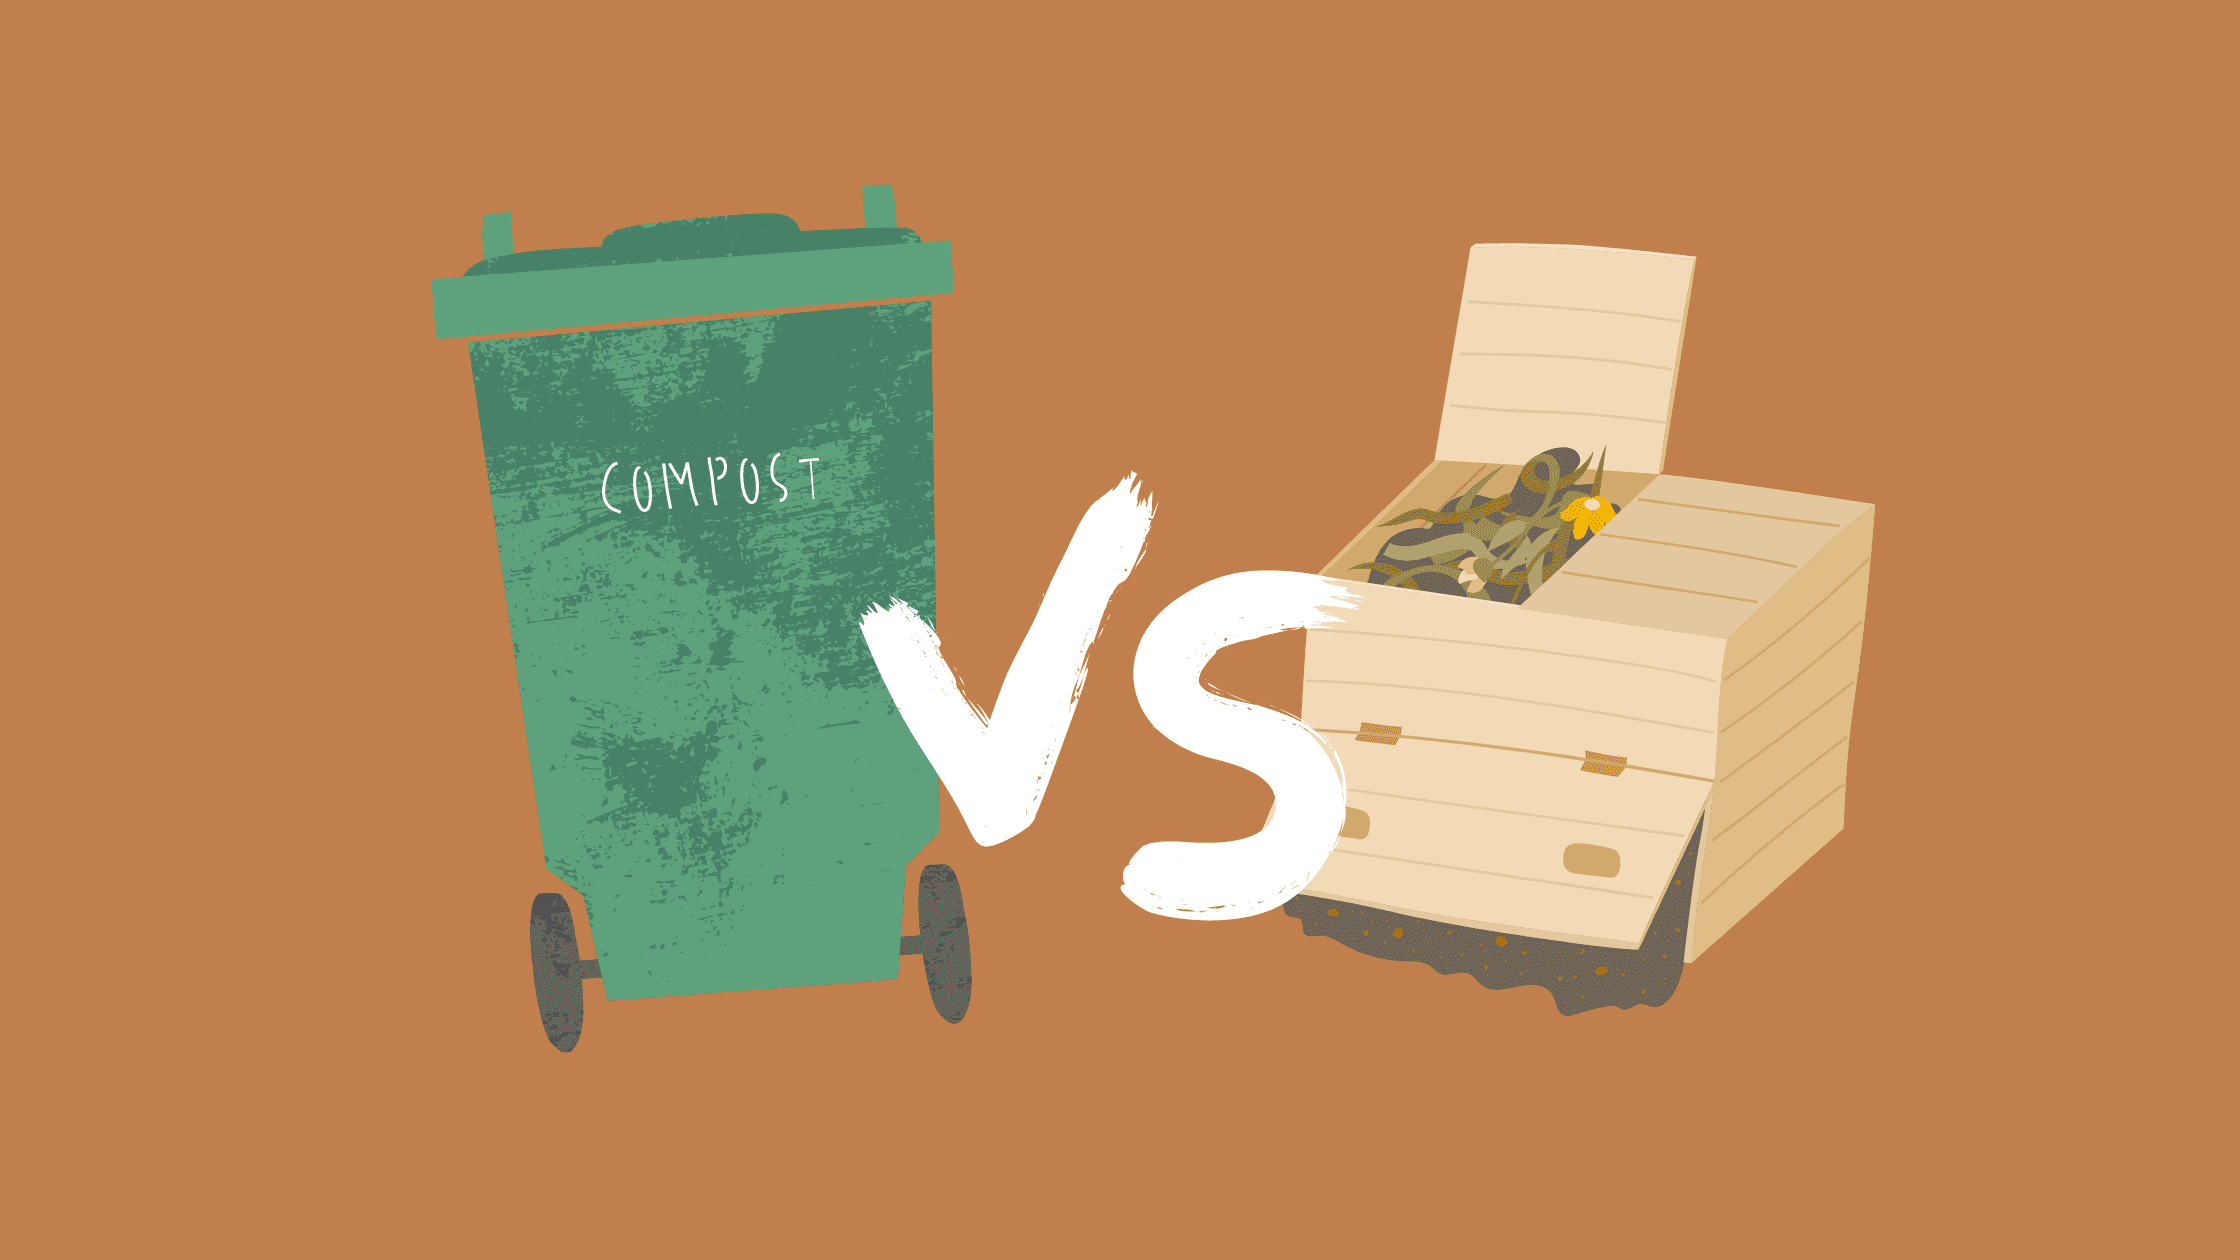 Commercial vs Home compostable packaging: One is still a source of pollution!